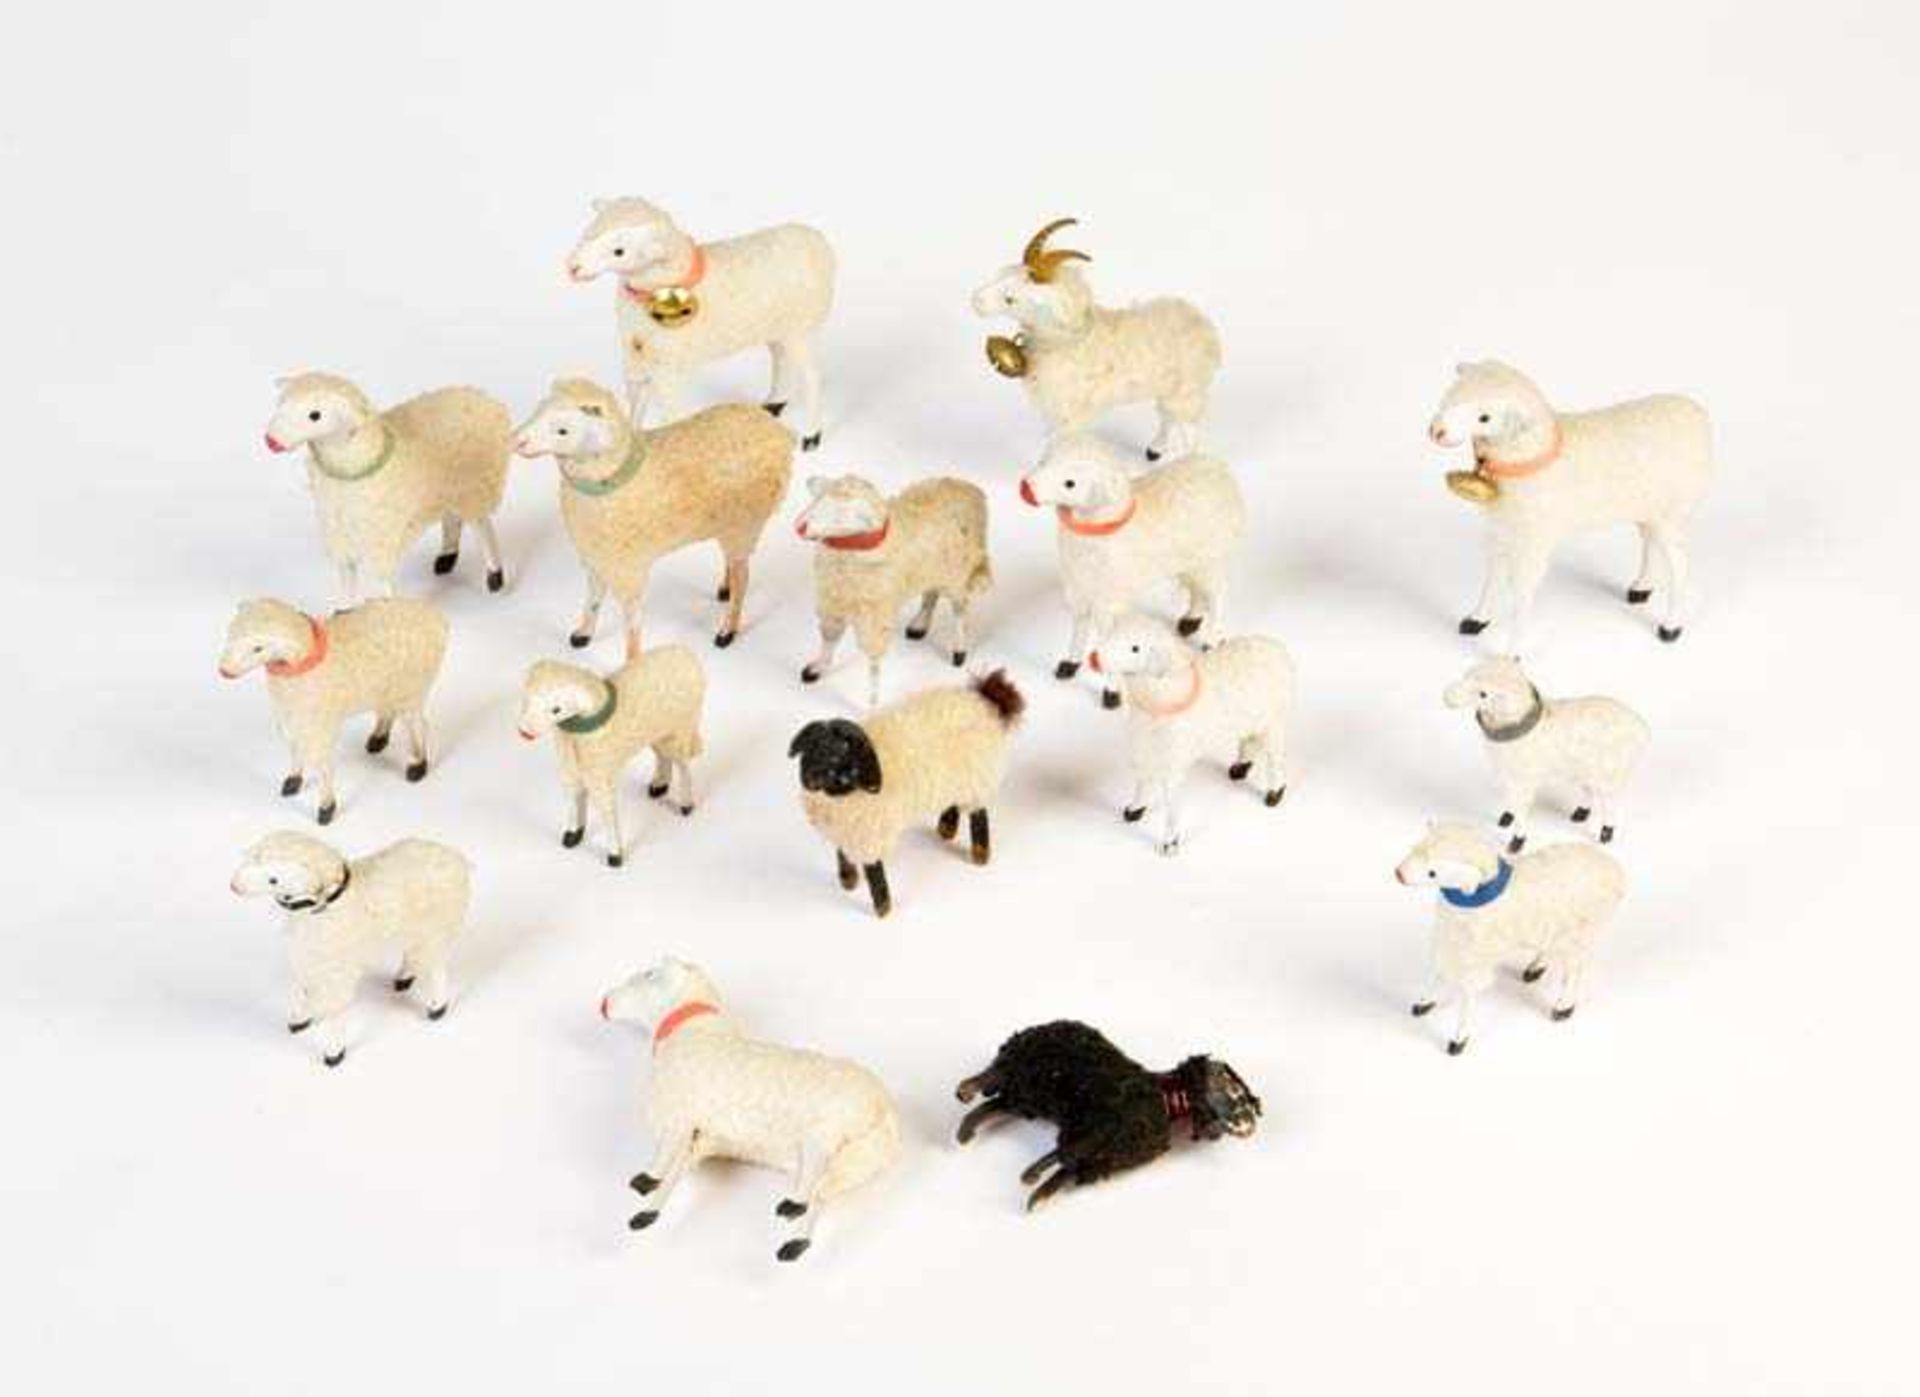 16 Sheeps, Germany pw, wood + wool, hand made, C 116 Schafe, Germany VK, 5-8 cm, Holz + Wolle,